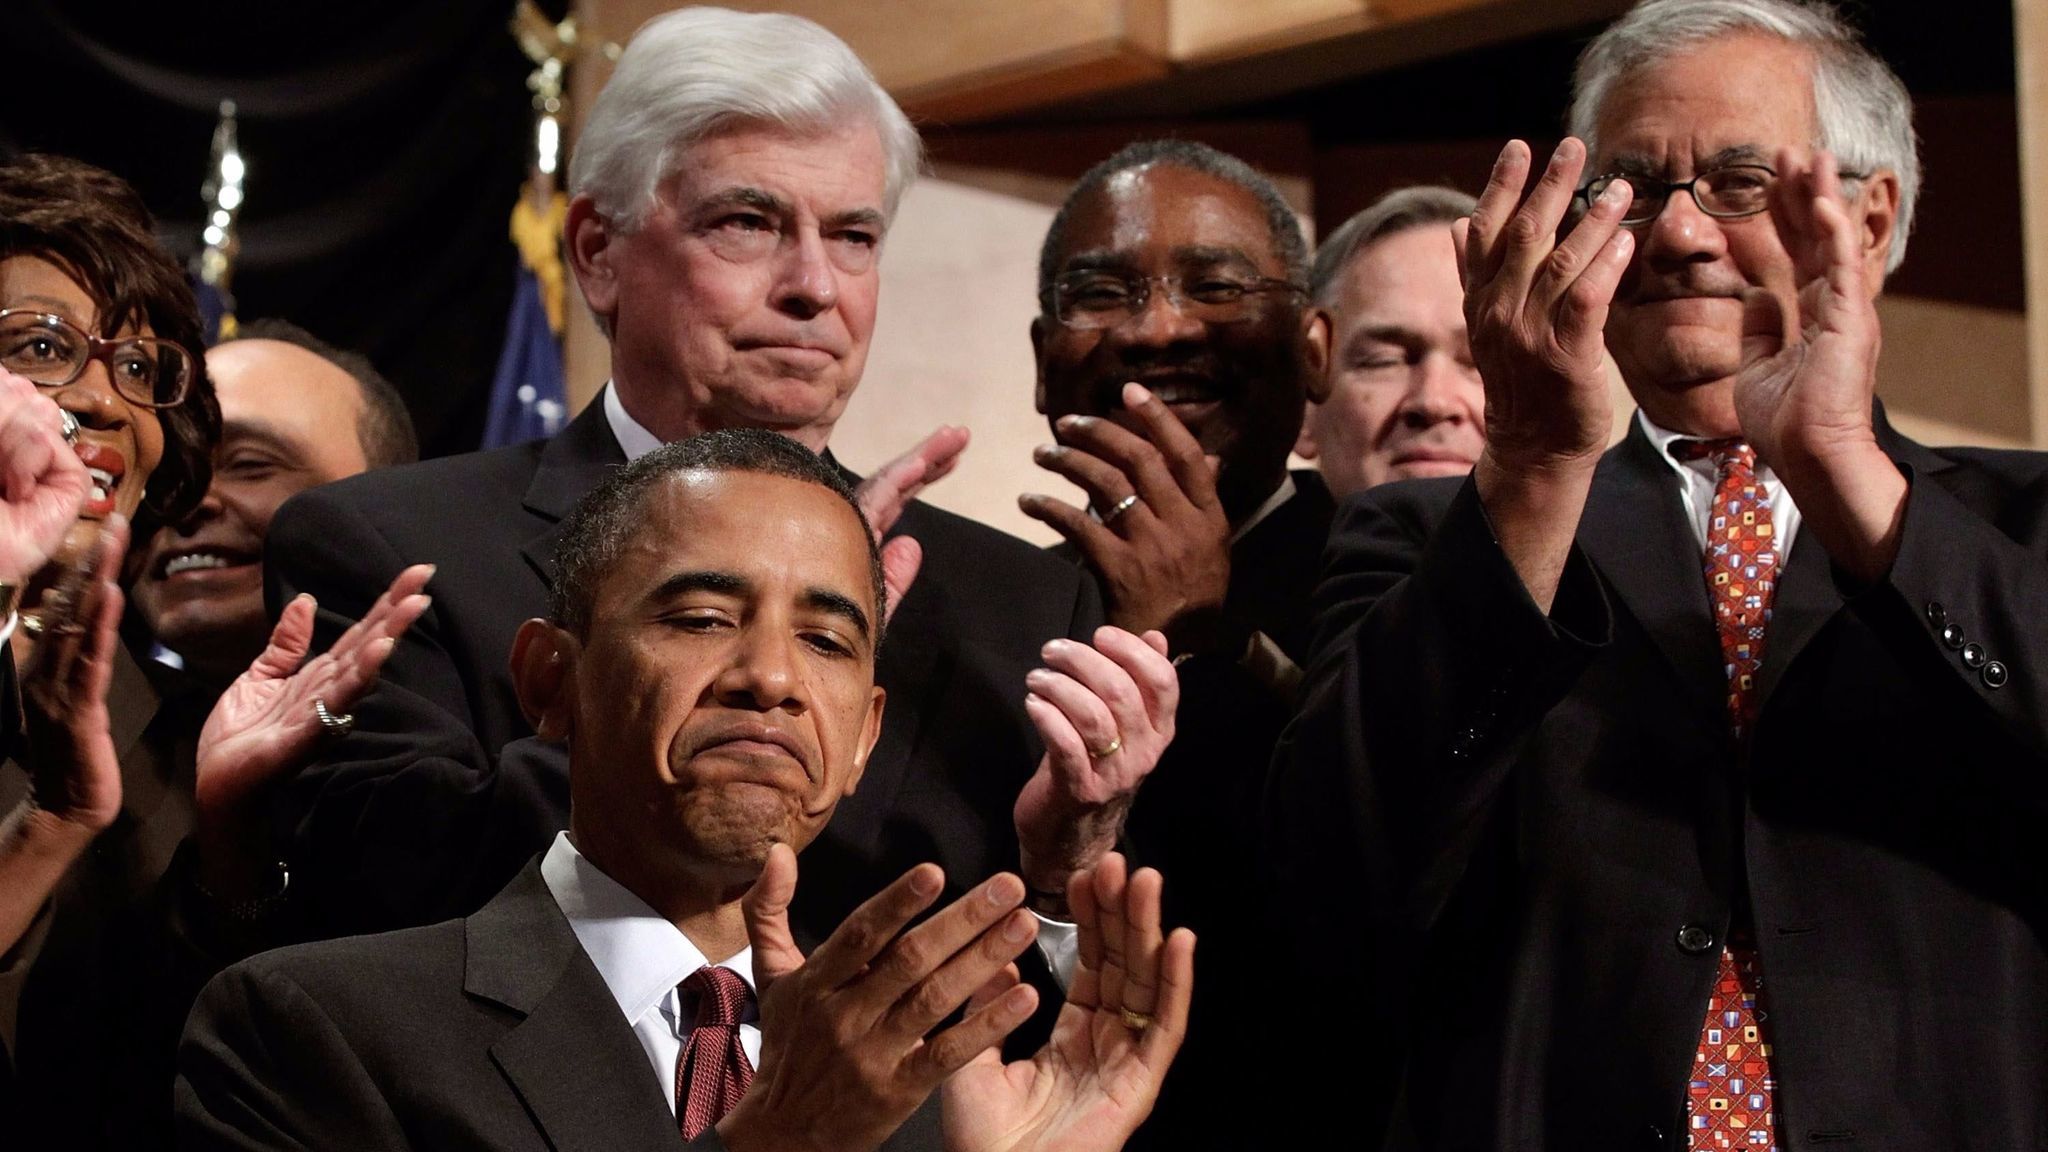 President Barack Obama applauds after signing the the Dodd-Frank financial reform bill into law in 2010, joined by Senate Banking Committee Chairman Christopher Dodd (D-Conn.), center, and  House Financial Services Committee Chairman Barney Frank (D-Mass.), right.